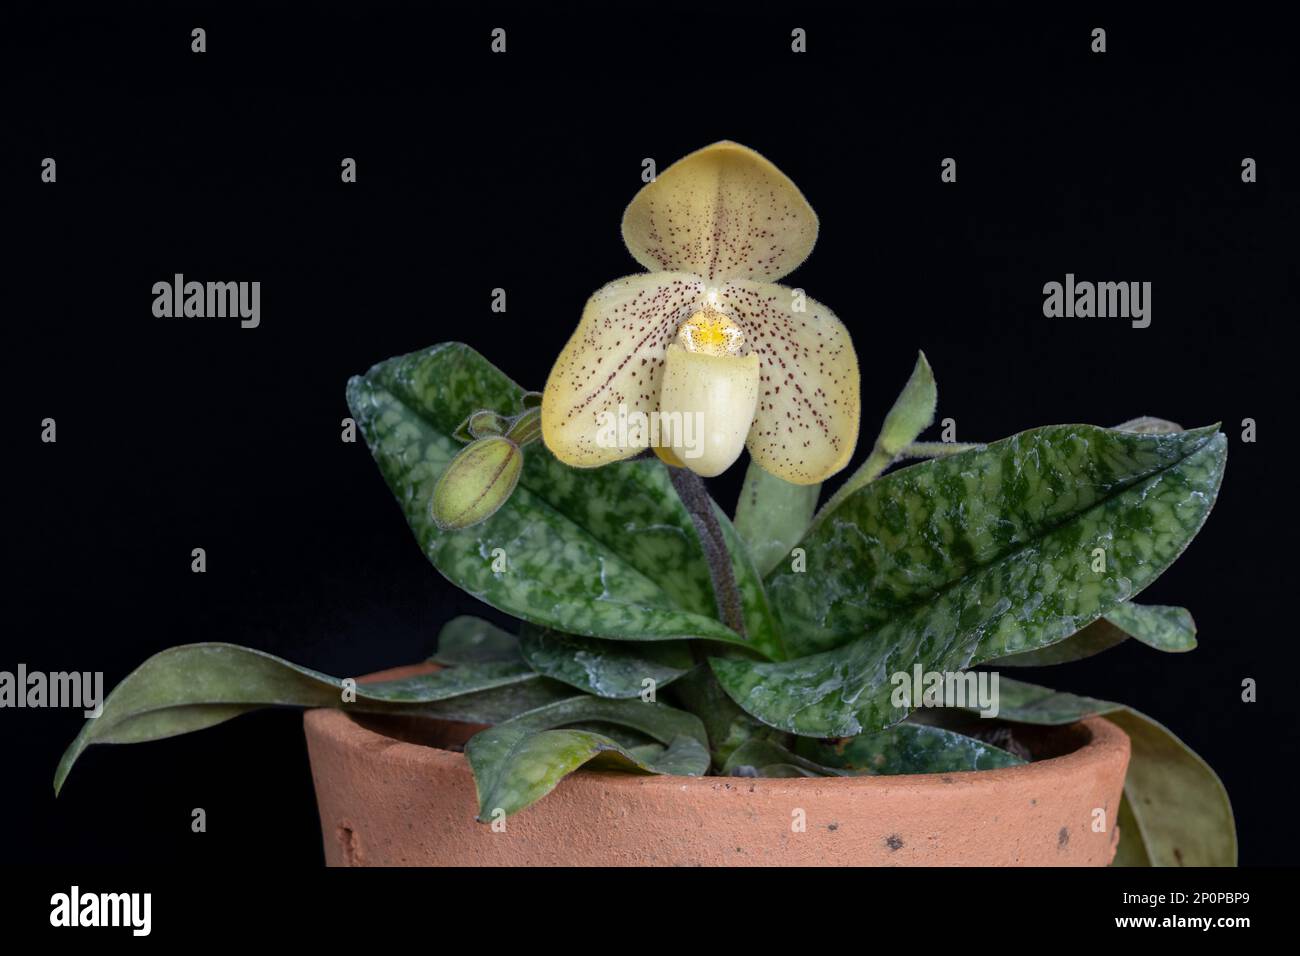 Closeup view of lady slipper orchid species paphiopedilum concolor with yellow flower and bud blooming in pot isolated on black background Stock Photo